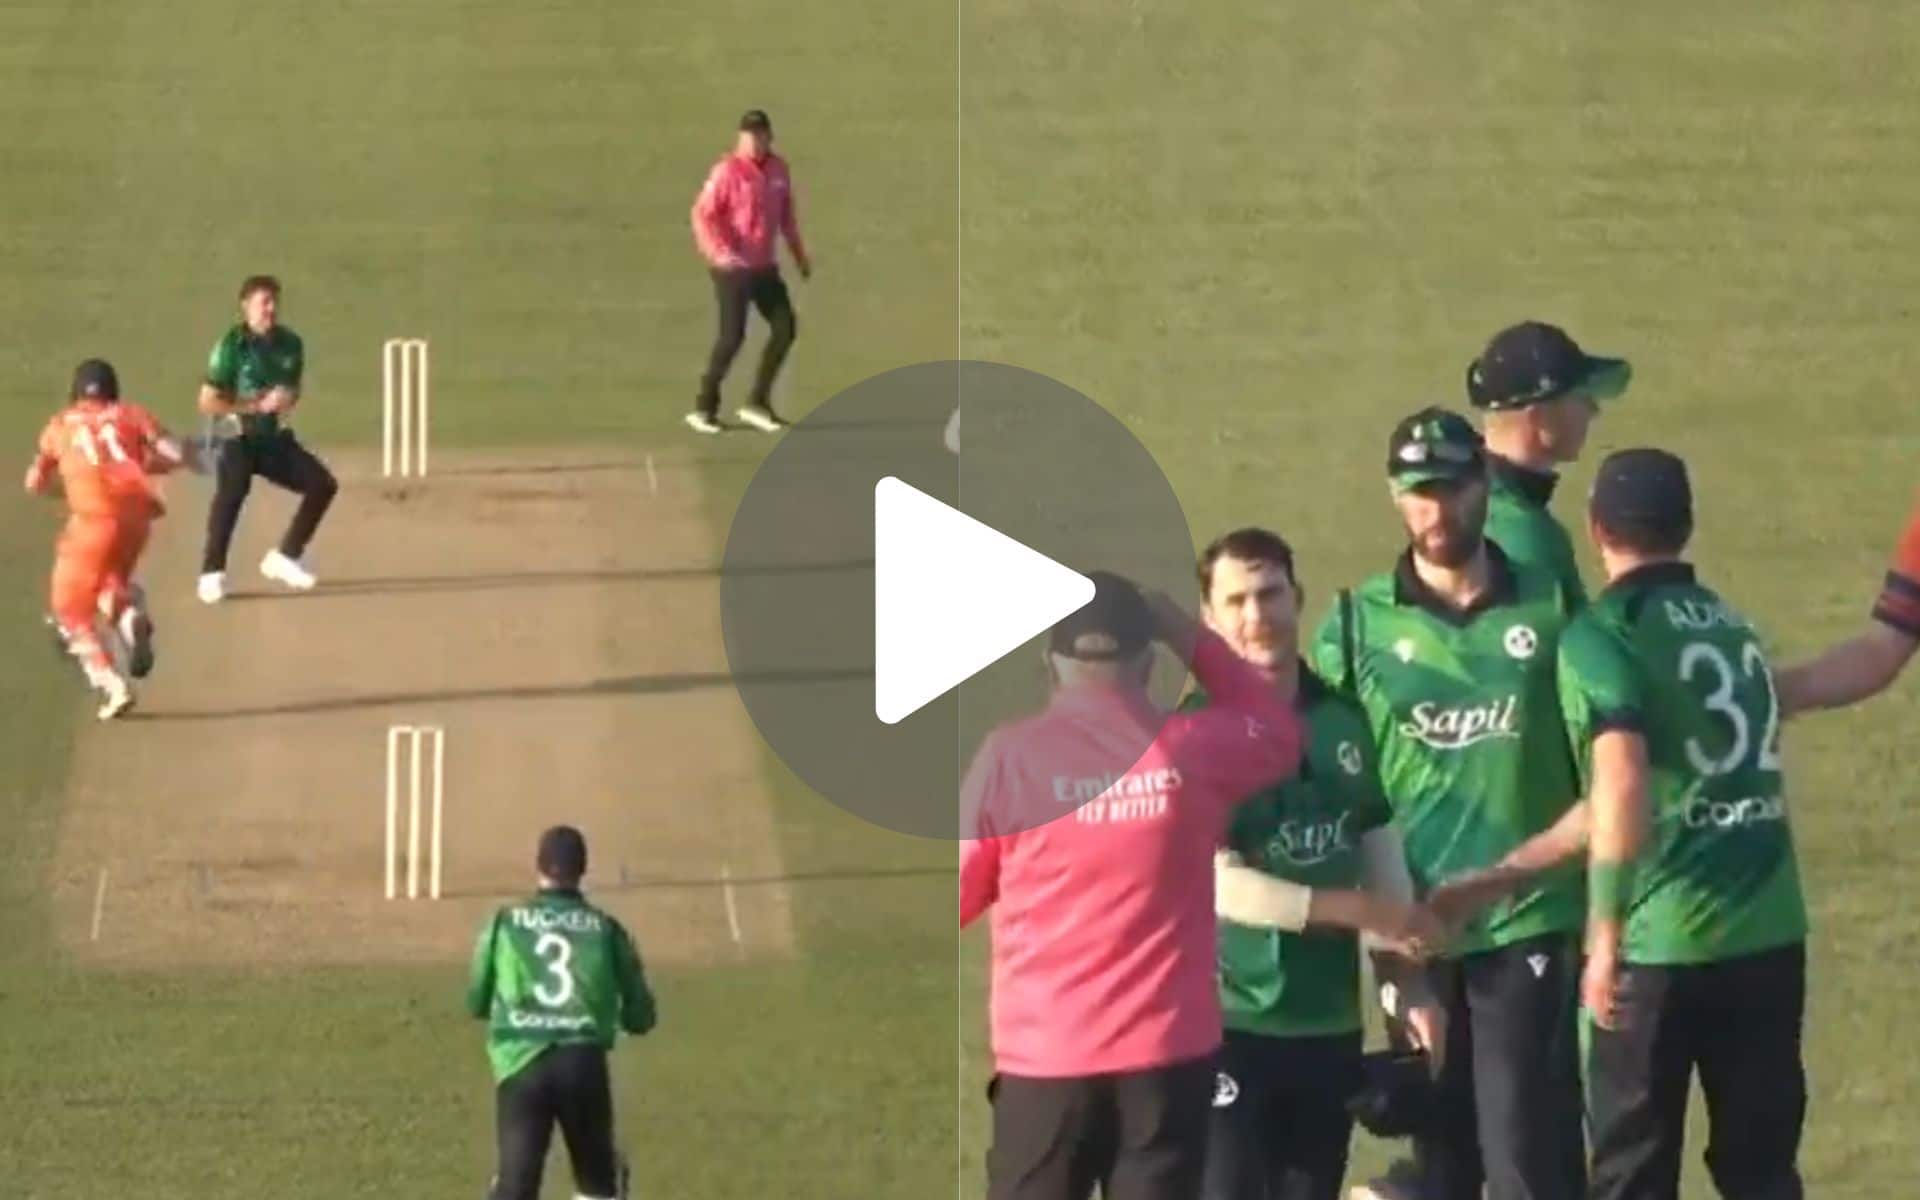 [Watch] Netherlands, Ireland Pull Off ‘Greatest Nail-Biting Thriller’ Before T20 World Cup